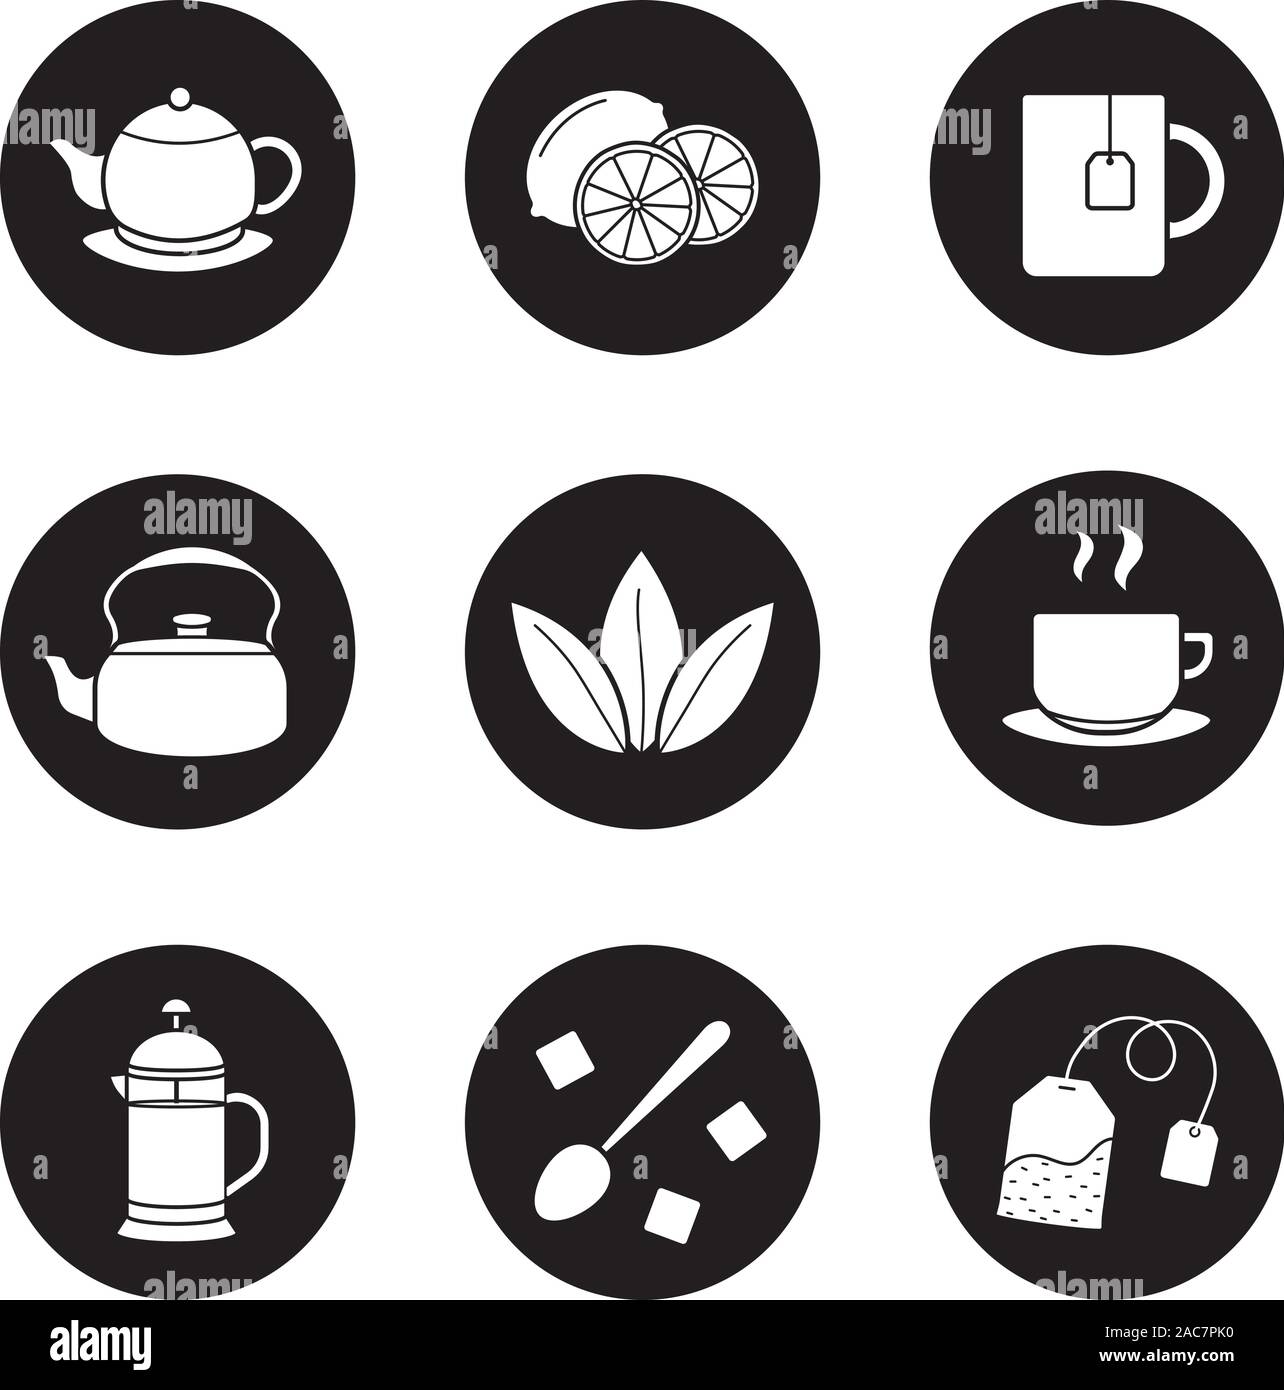 Tea icons set. Cutted lemon, steaming cup on plate, brewer, teapot, loose tea leaves, teabag, refined sugar cubes with spoon, kettle, mug. Vector whit Stock Vector